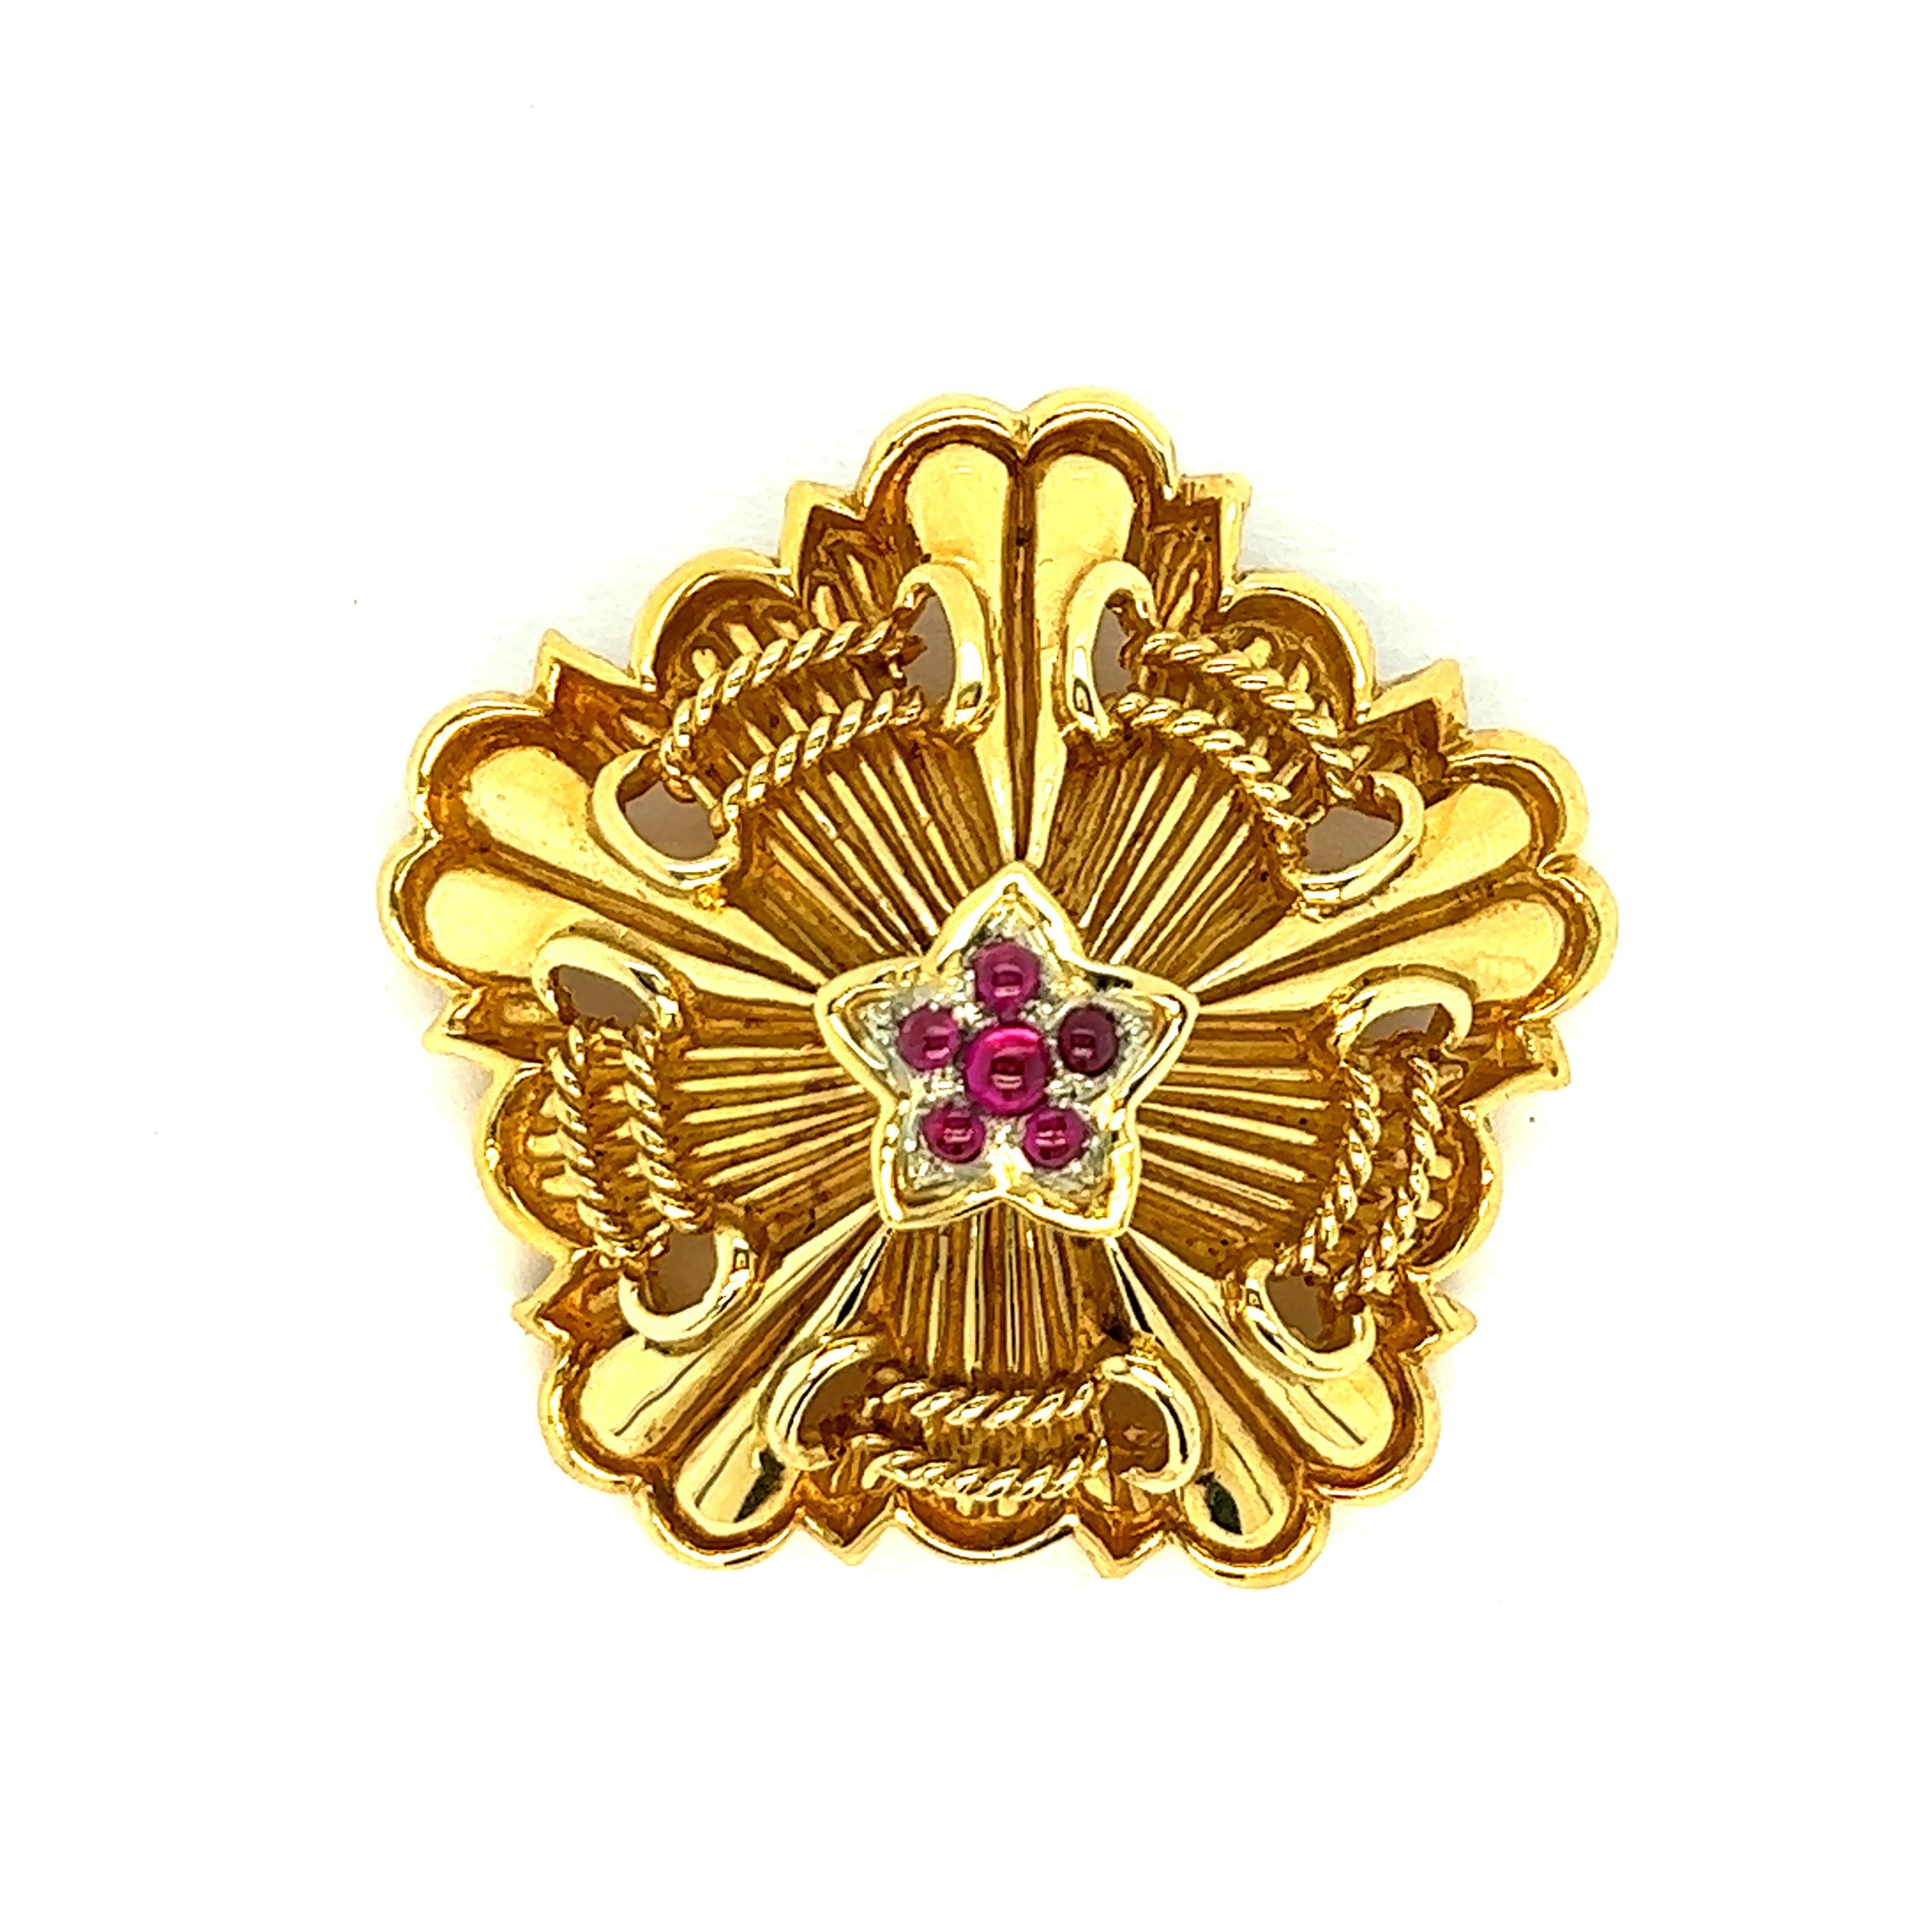 Tiffany & Co. ruby gold brooch

Cabochon rubies, 18 karat yellow gold, very well-made with beautiful details; marked Tiffany, 18k

Size: width 1.88 inches, length 1.75 inches, depth 0.63 inch
Total weight: 34.2 grams